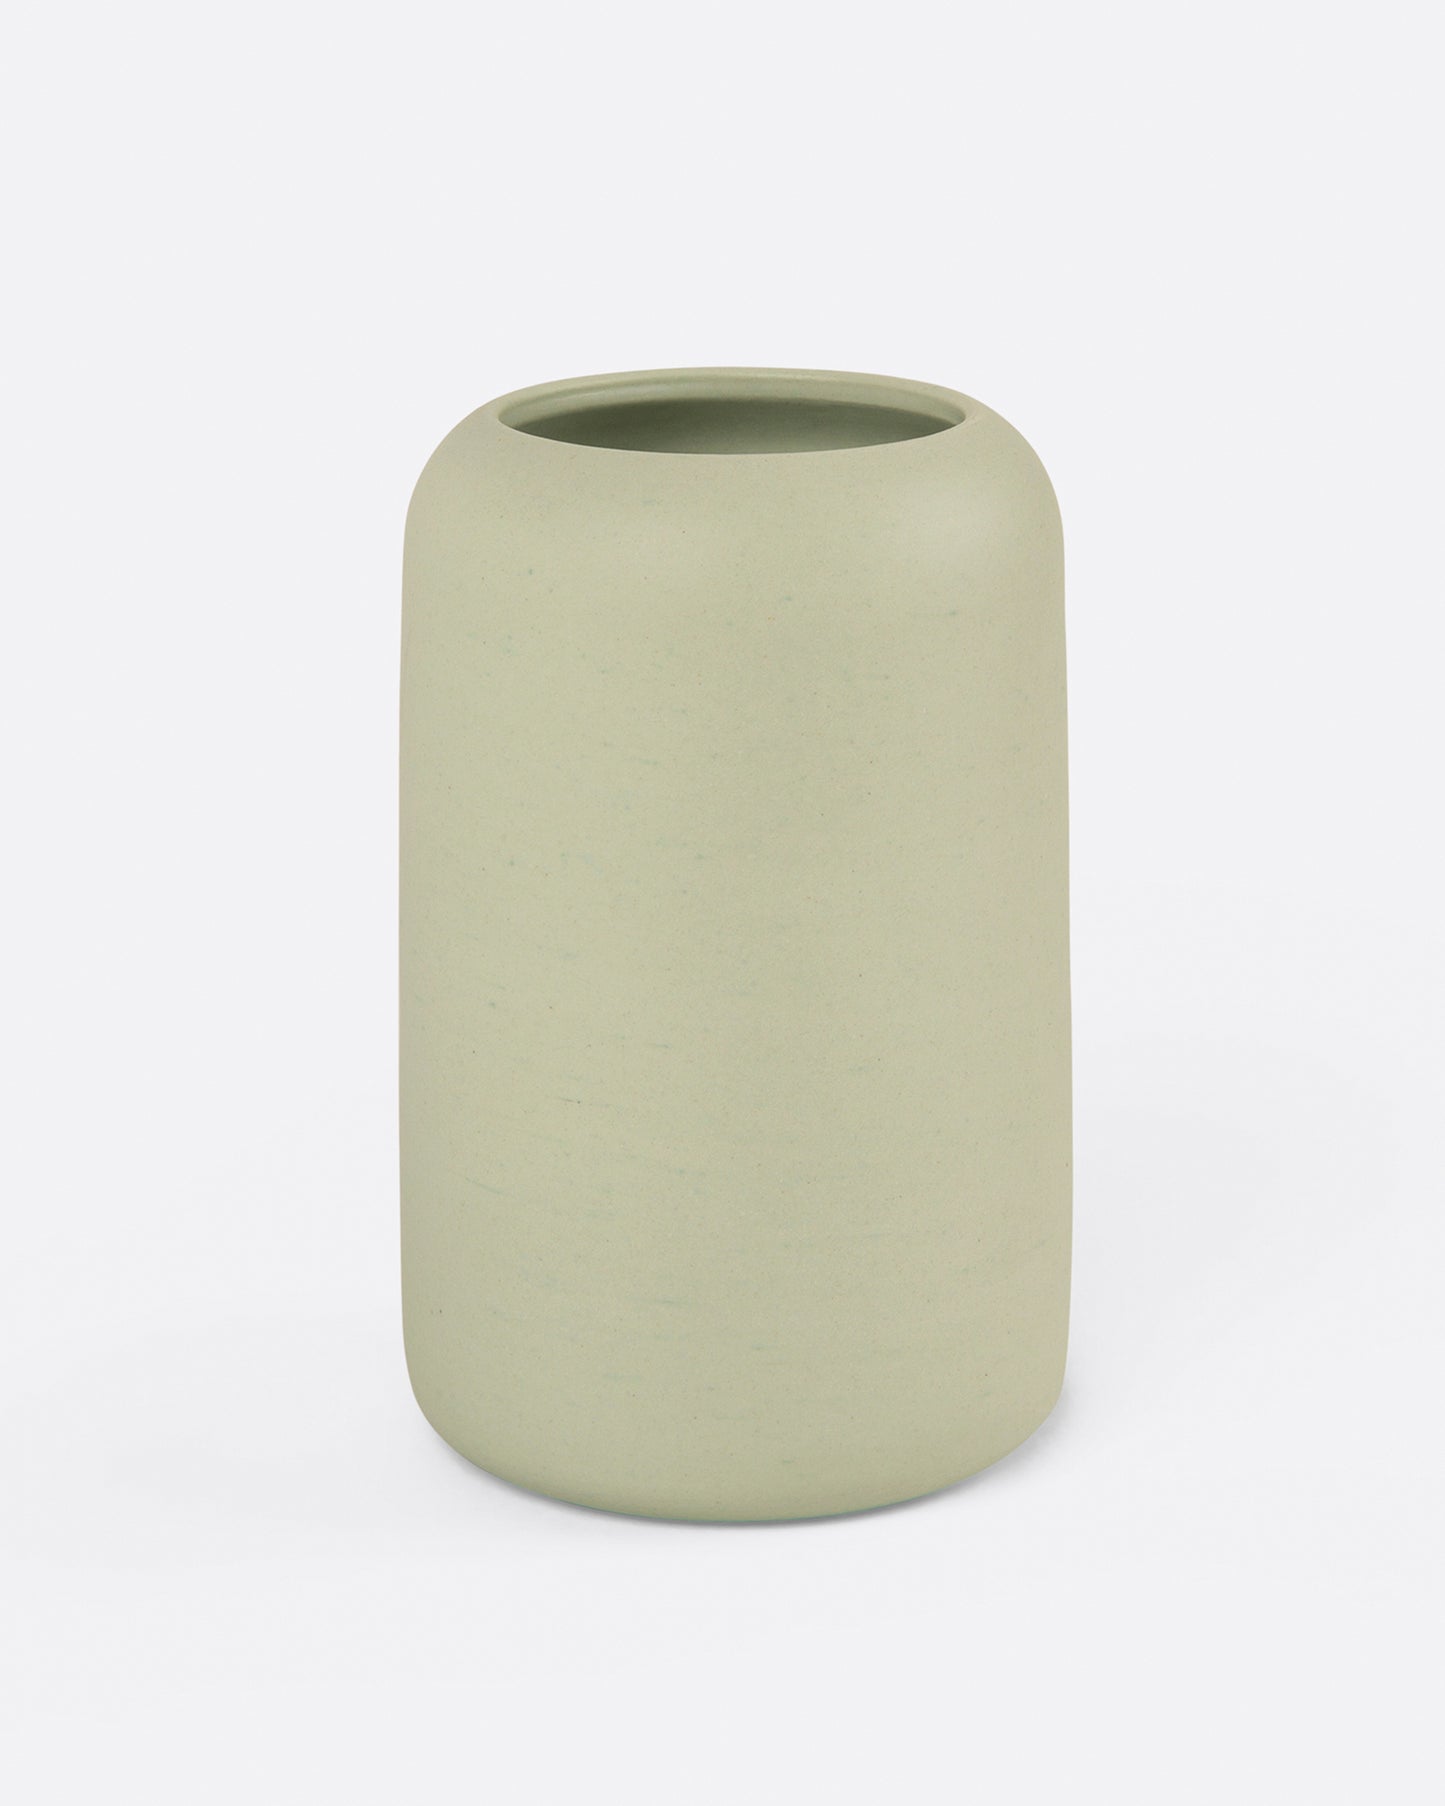 A green porcelain vase, shown from the side.